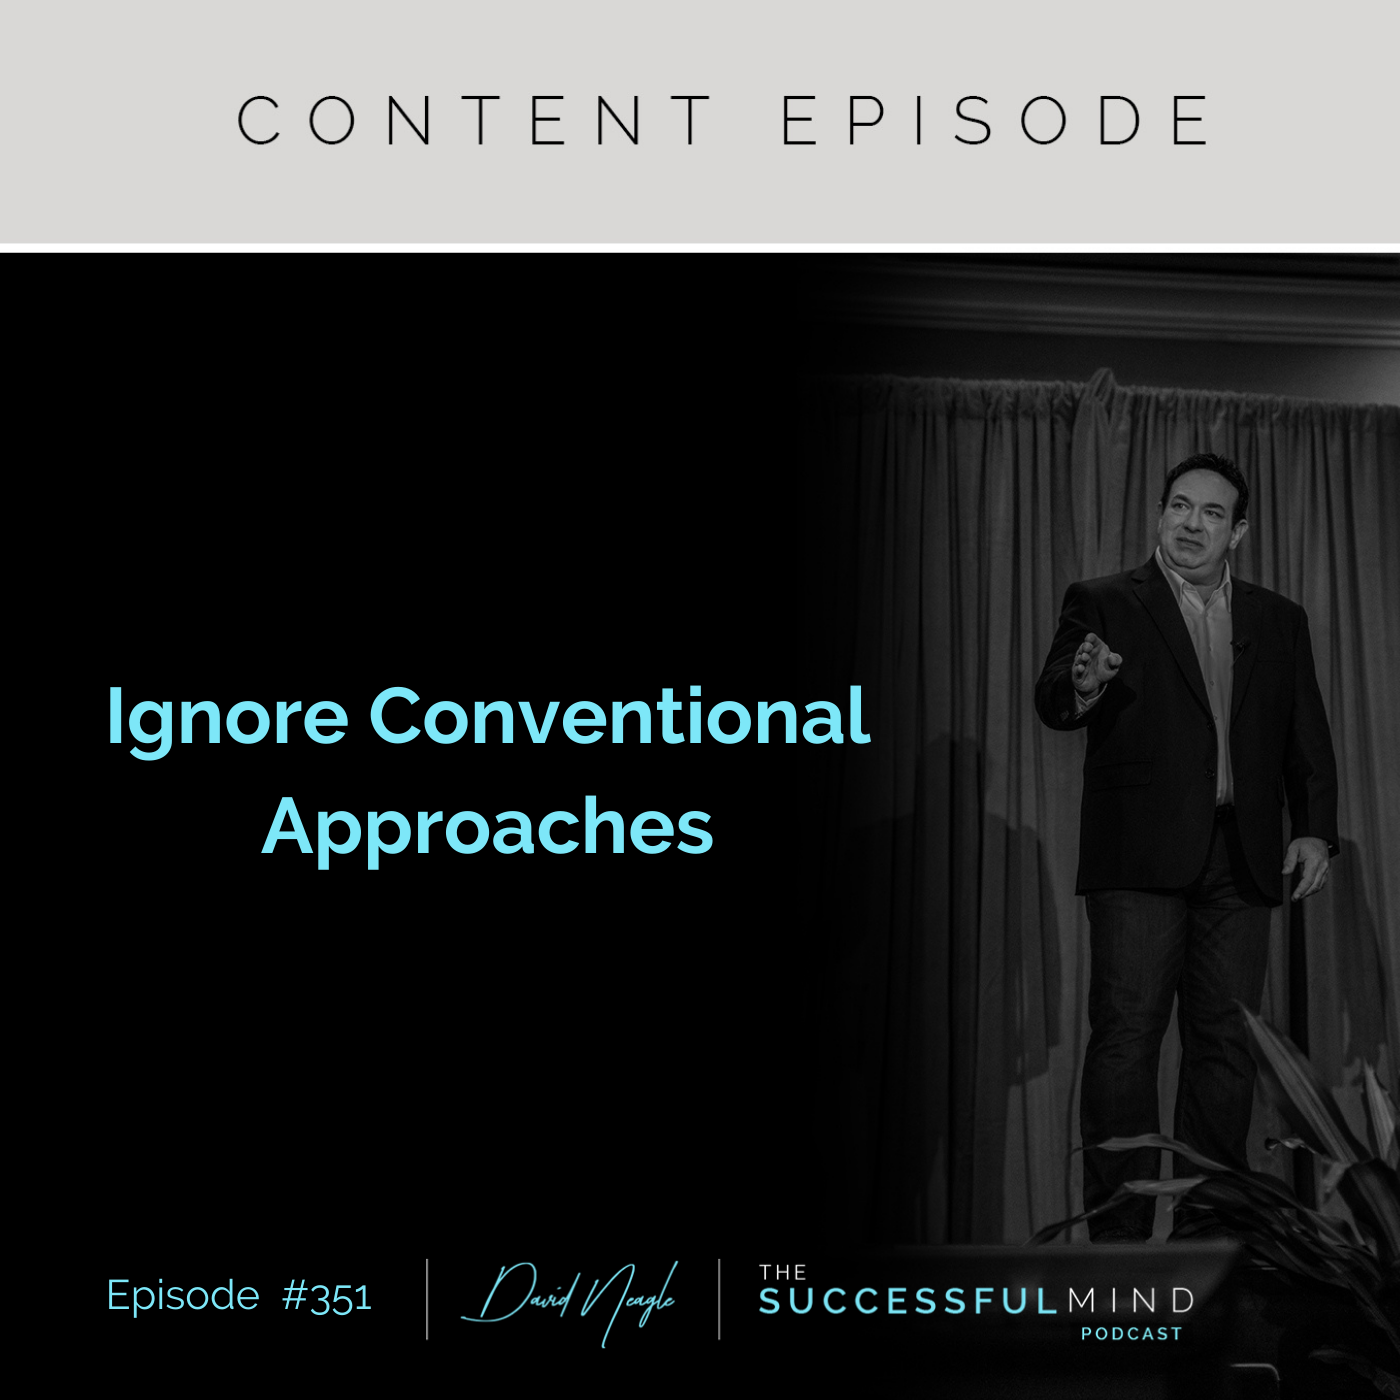 The Successful Mind Podcast - Episode 351 - Ignore Conventional Approaches